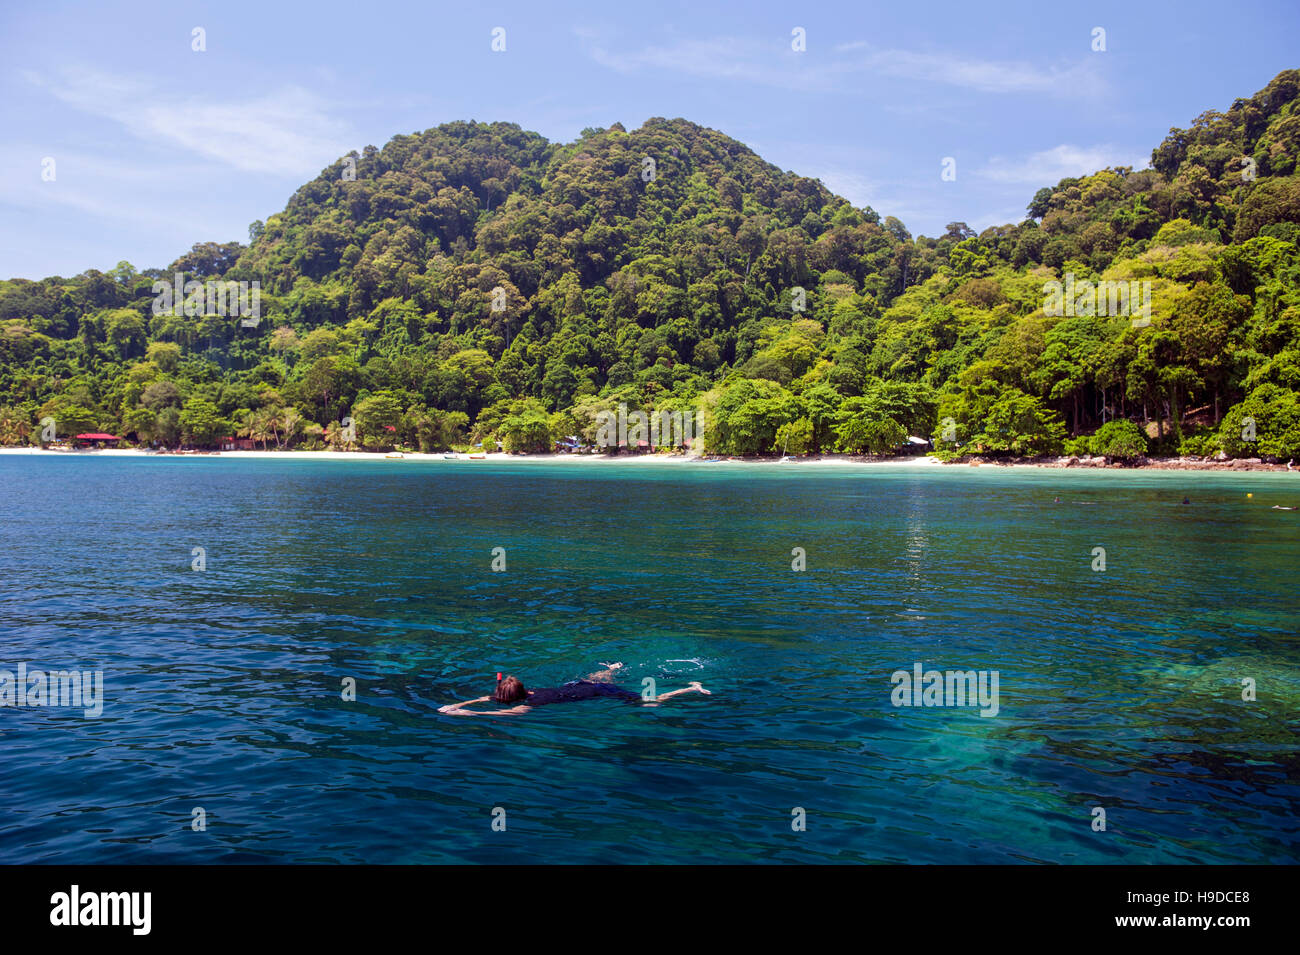 Snorkeling at Pulau Tenggol, an island off peninsular Malaysia's east coast, boasting some of the finest and most untouched beaches in Asia. Stock Photo